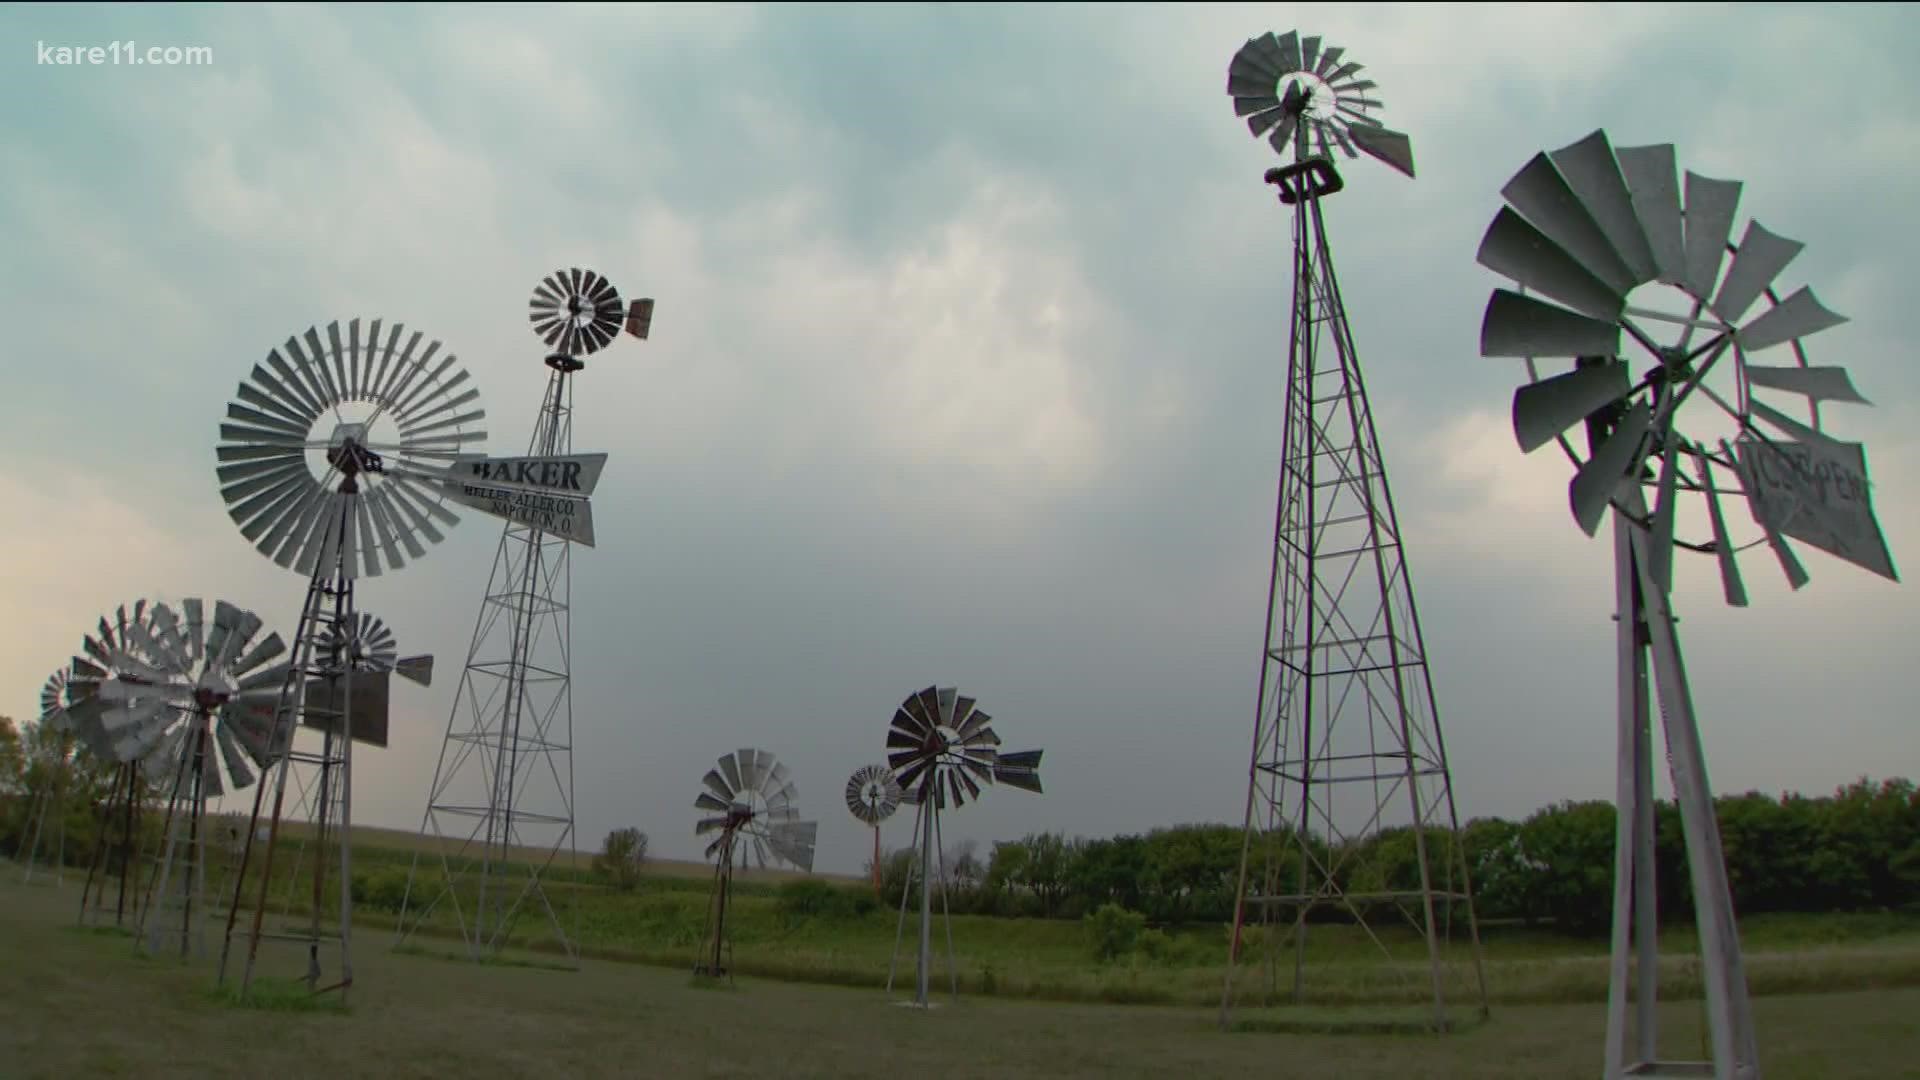 Terry Rodman cares for 44 old windmills he's assembled from around the world.